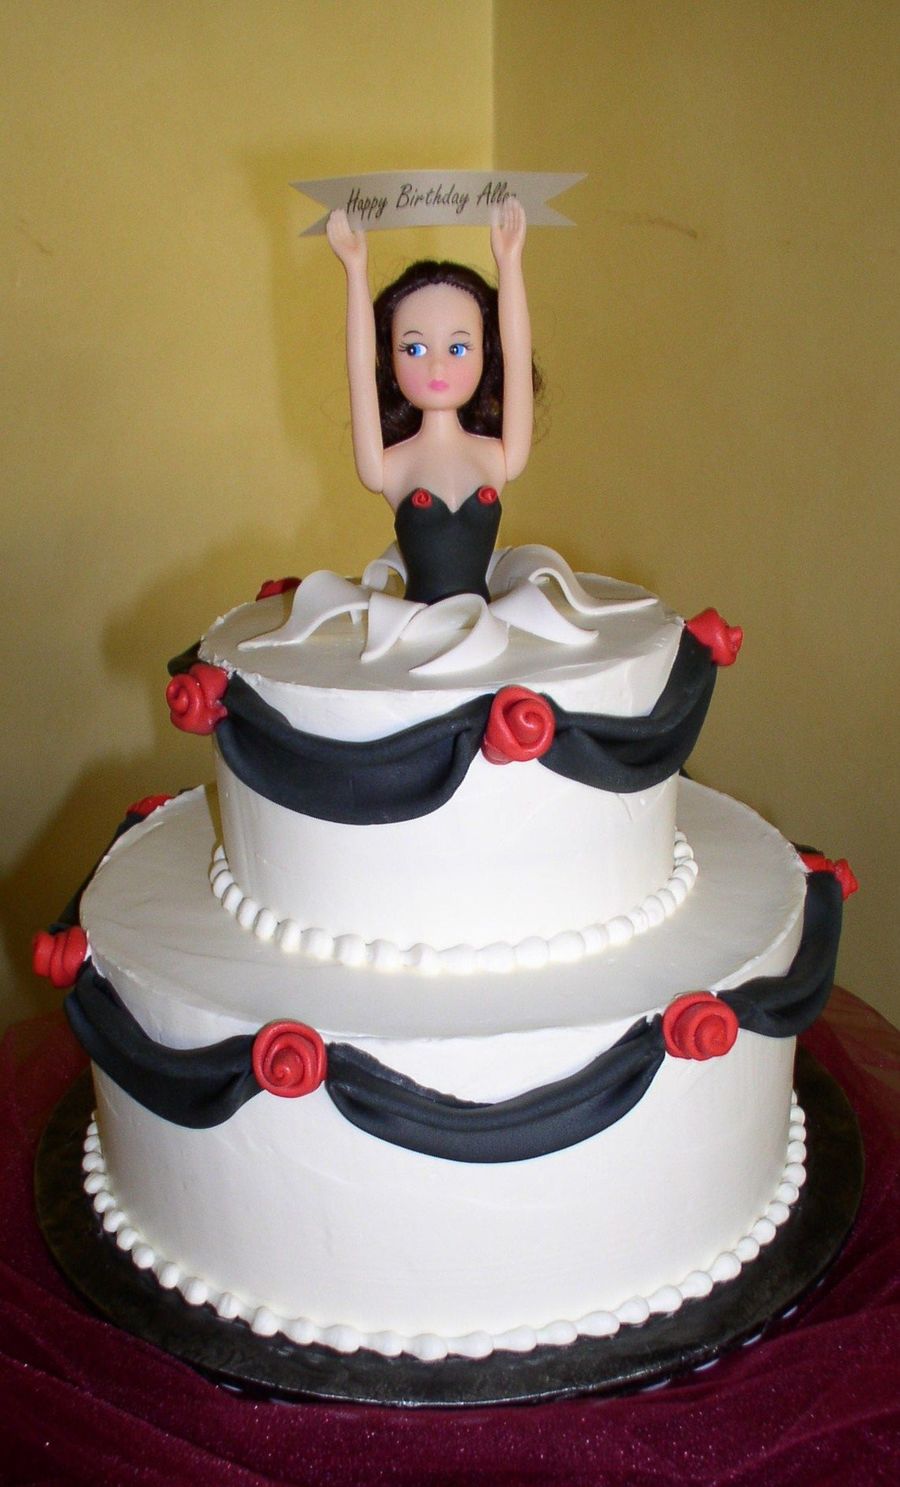 Girl Jumping Out of Cake